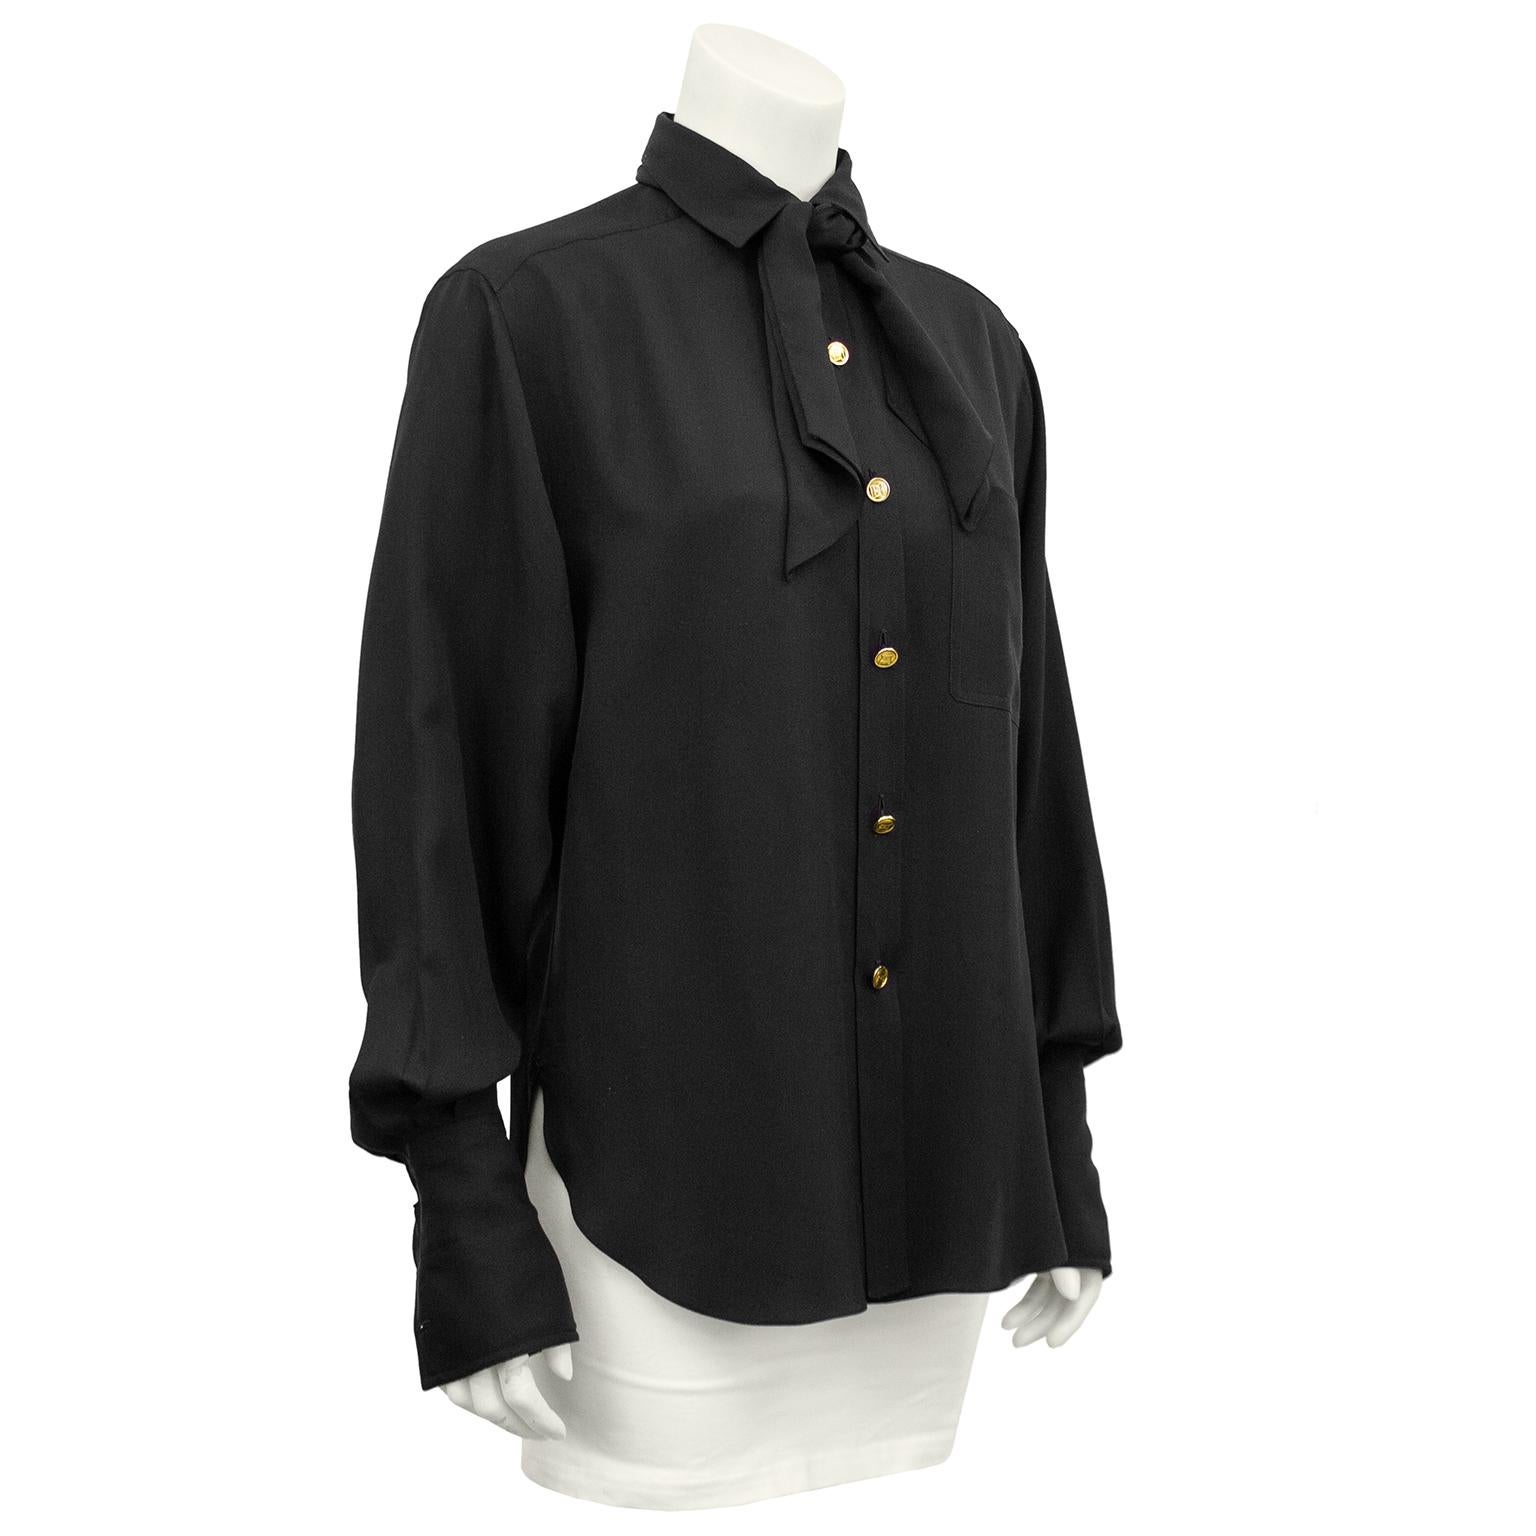 The quintessentially perfect Chanel 1990s blouse. Black silk and slightly oversized throughout the body with a tie at the neck. Bishop sleeves with oversized cuffs that extend over the hands. Bright gold, amazing Chanel buttons engraved with the